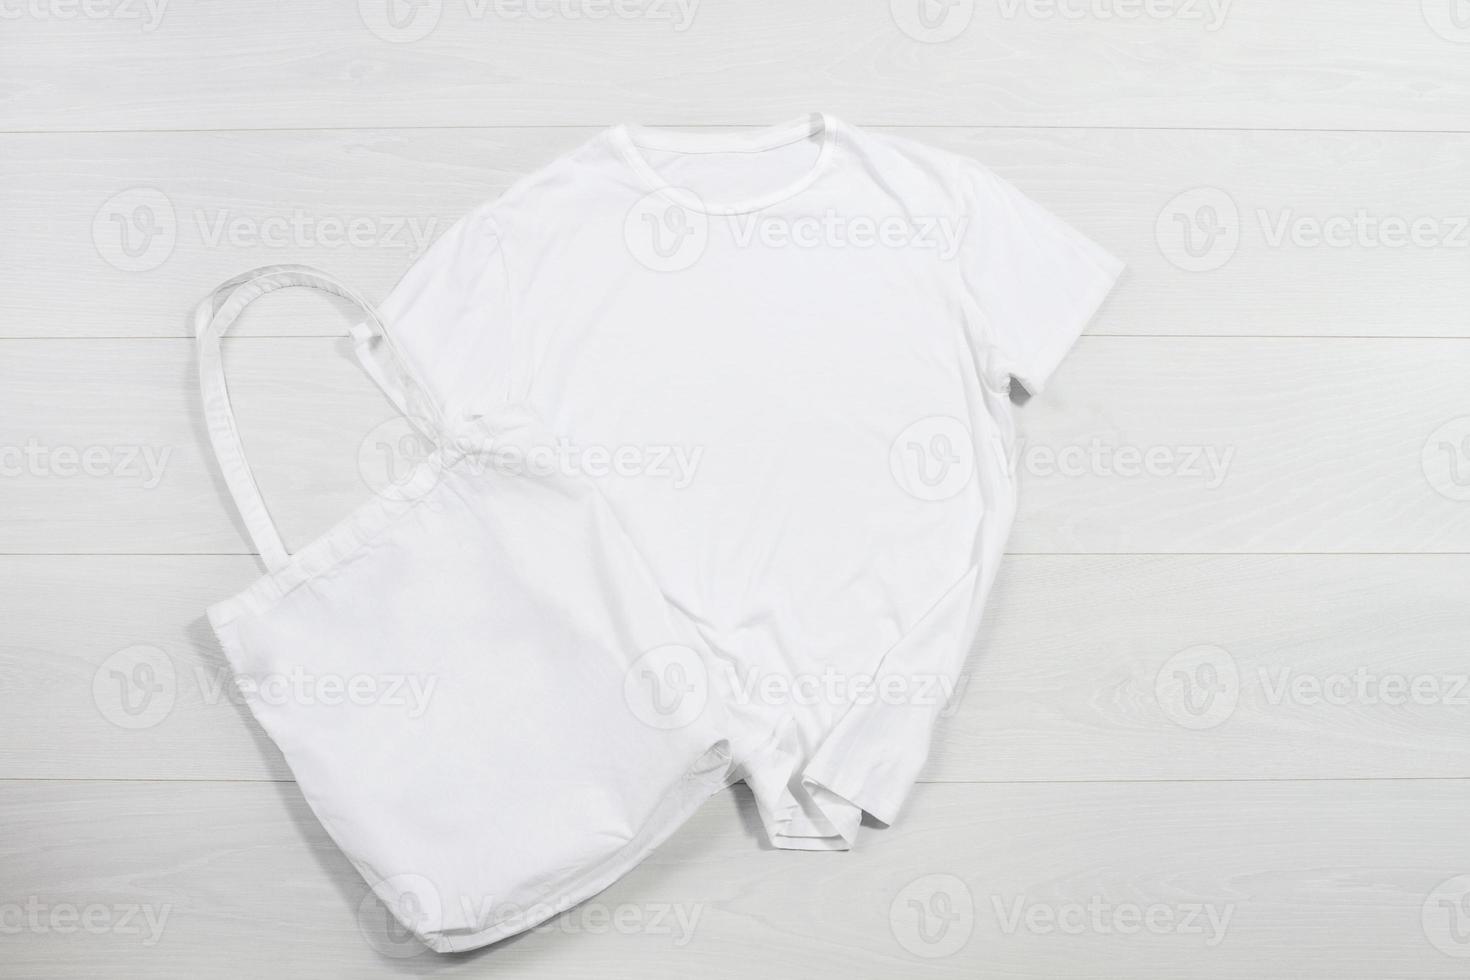 Mockup tshirt white shopper handbag on wood background. Top view copy space shopping eco reusable bag. Template blank cotton material canvas t-shirt cloth. Empty mock-up shirt beach fabric photo